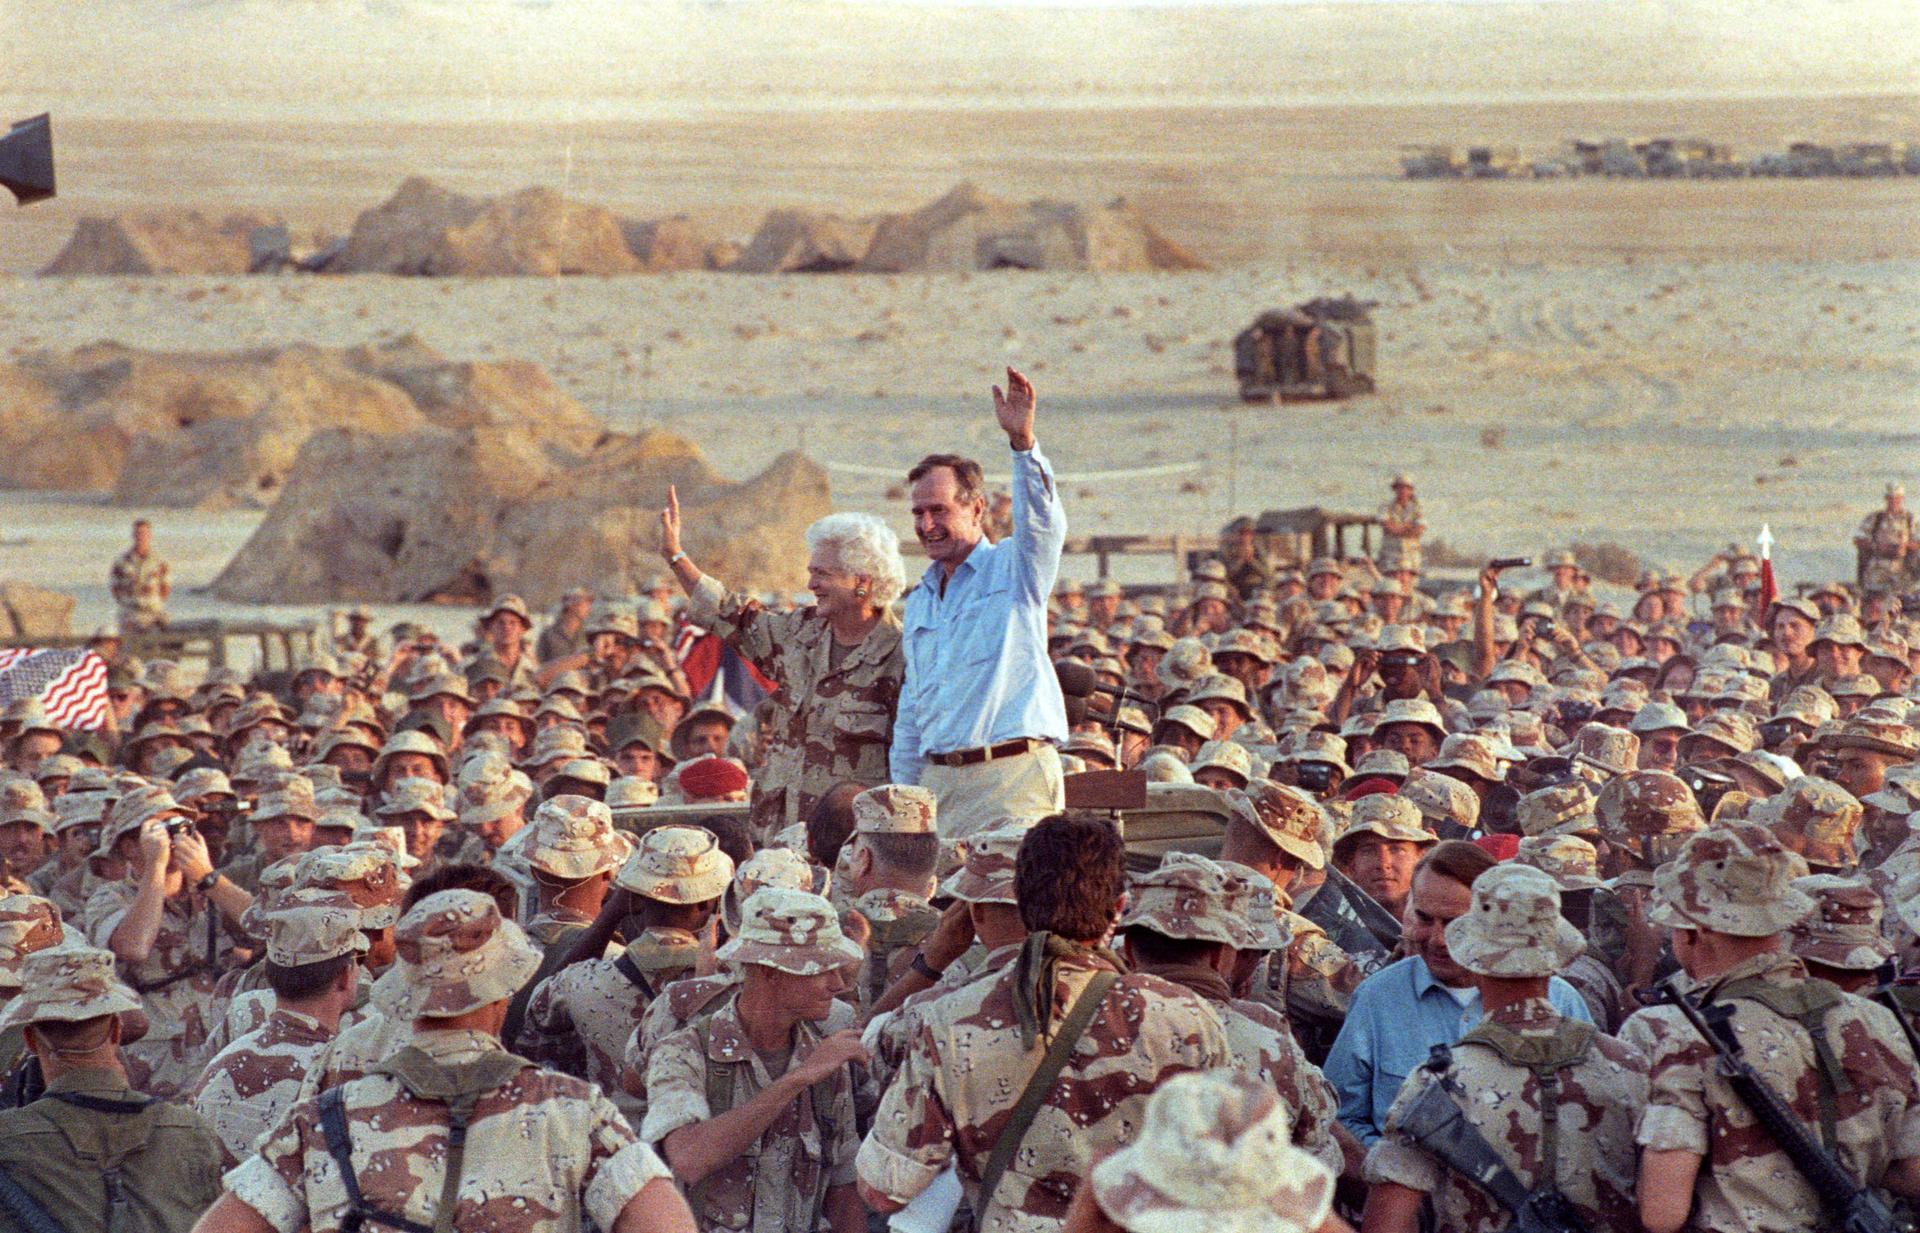 President HW Bush and his wife wave while surrounded by a large crowd of soldiers wearing tan and khaki fatigues